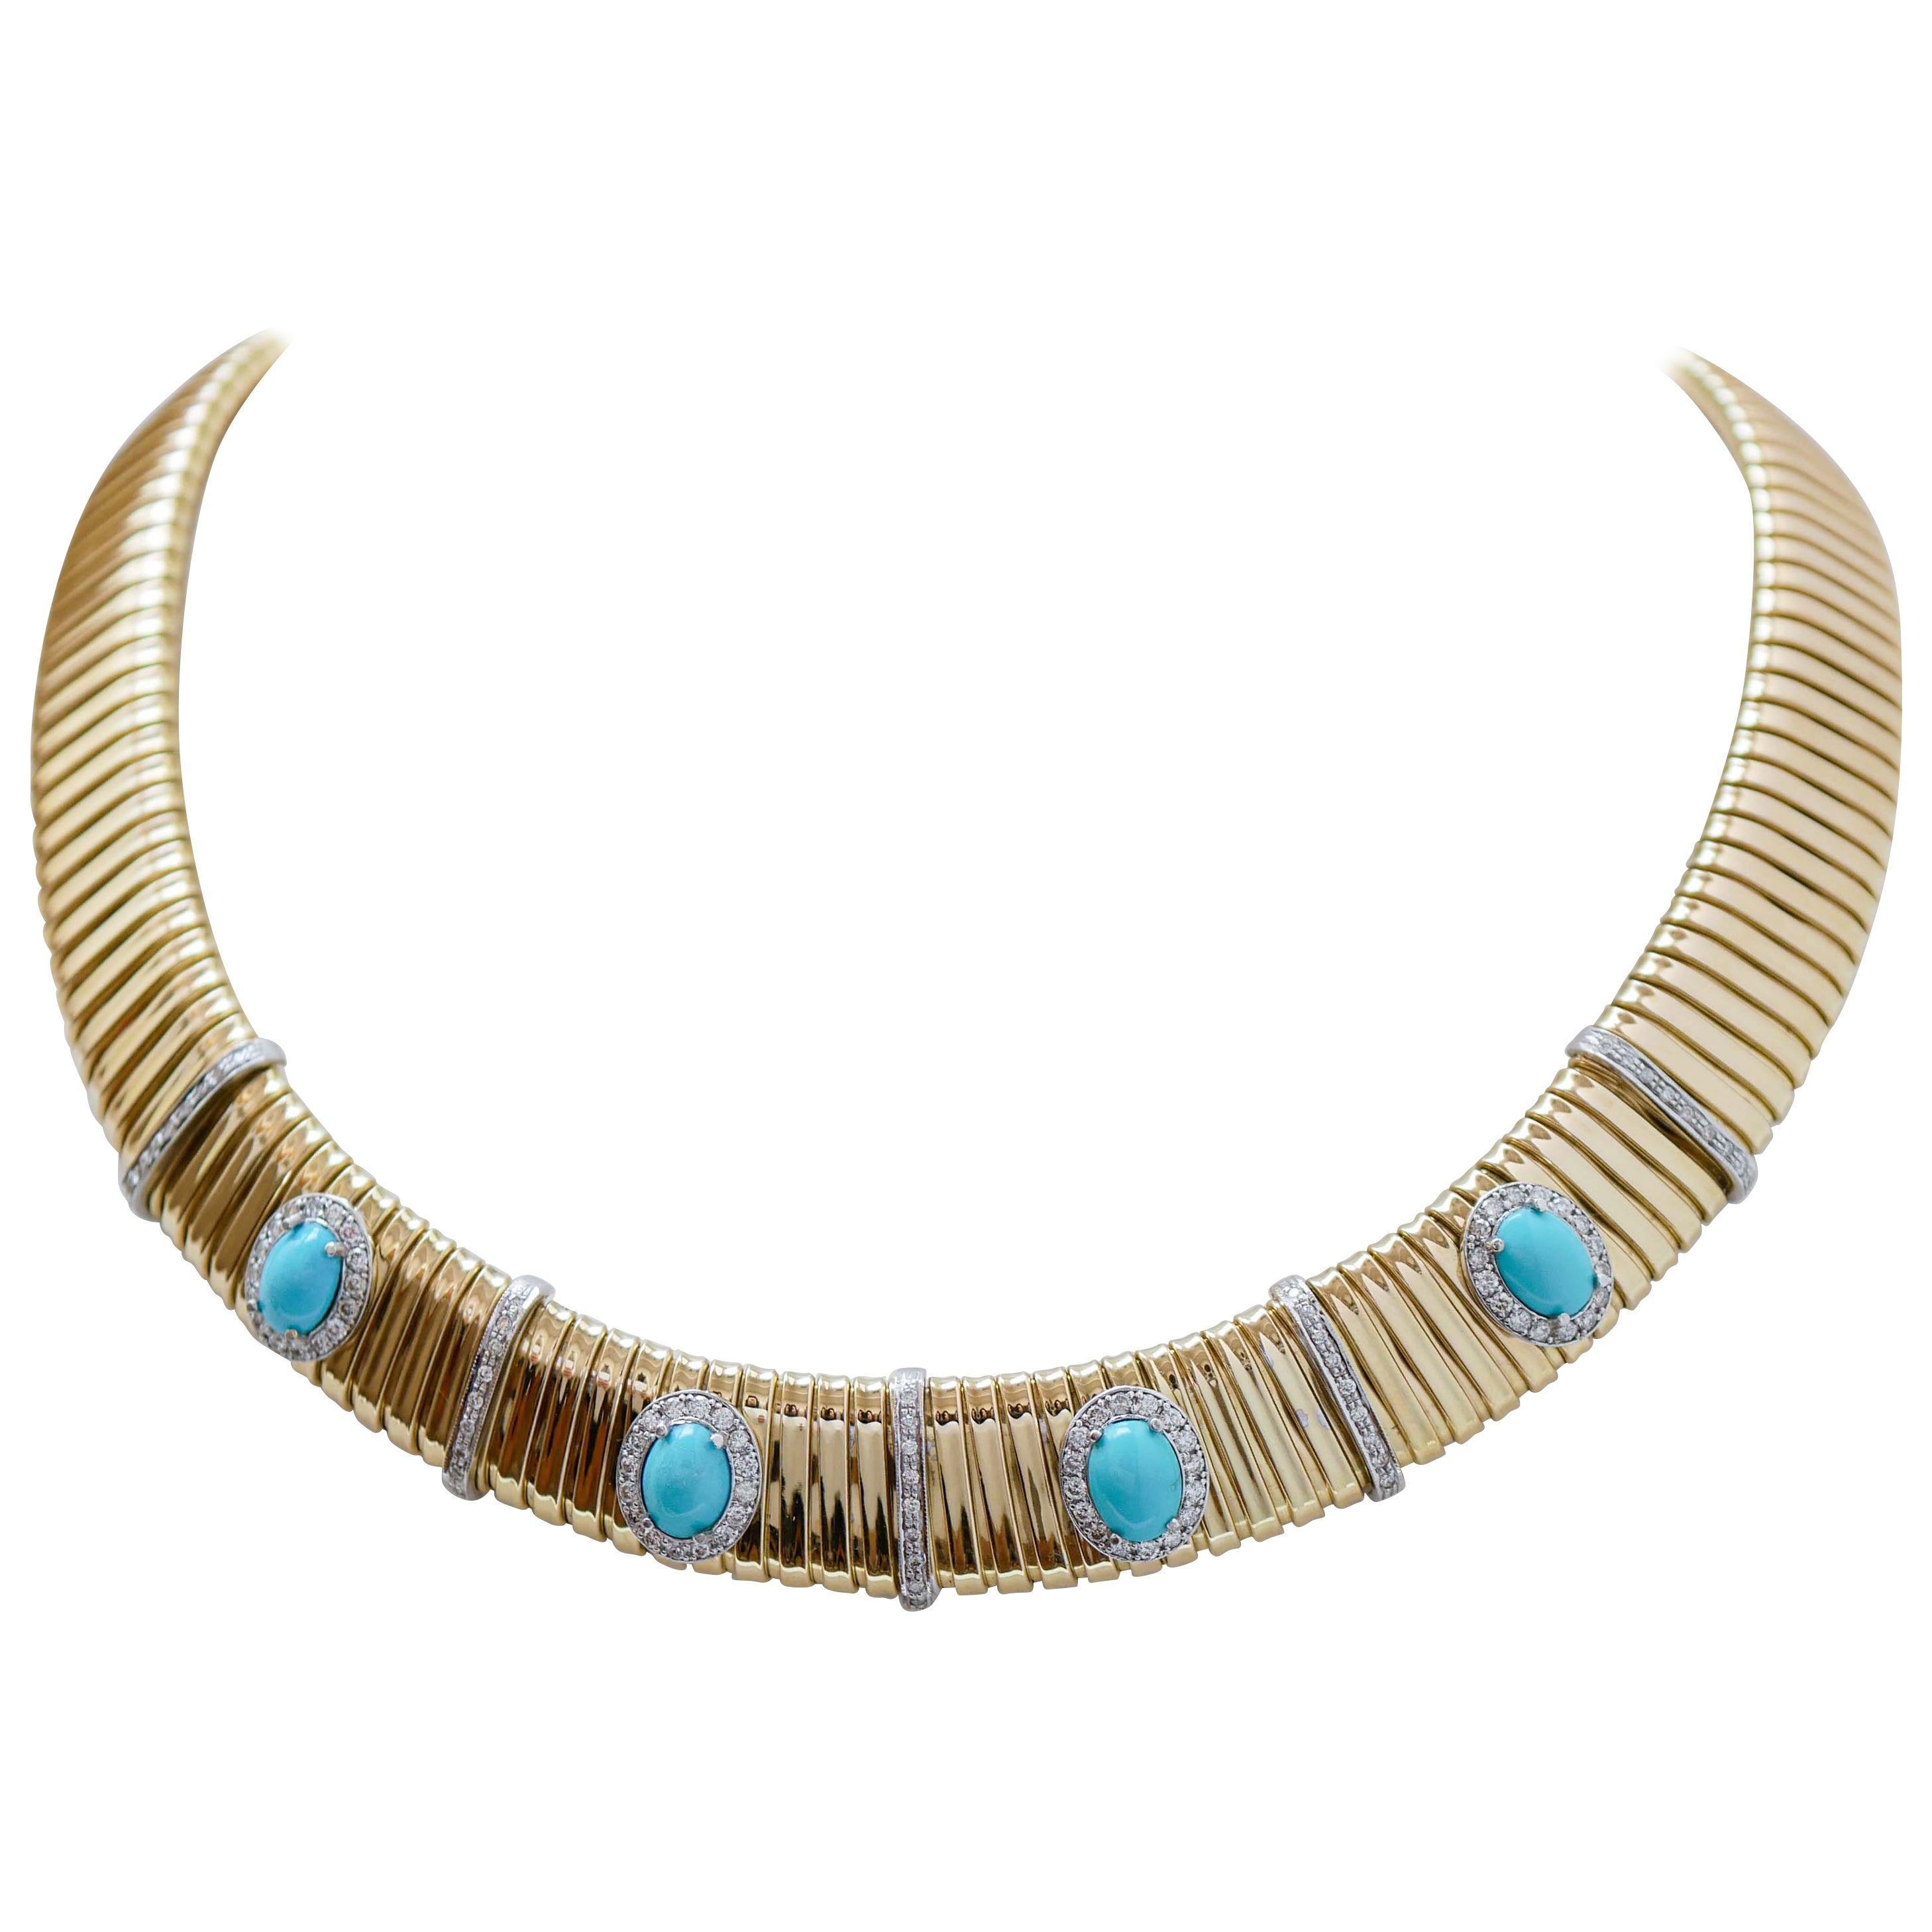 Turquoise, Diamonds, 18 Karat Yellow Gold and White Gold Tubogas Necklace. For Sale